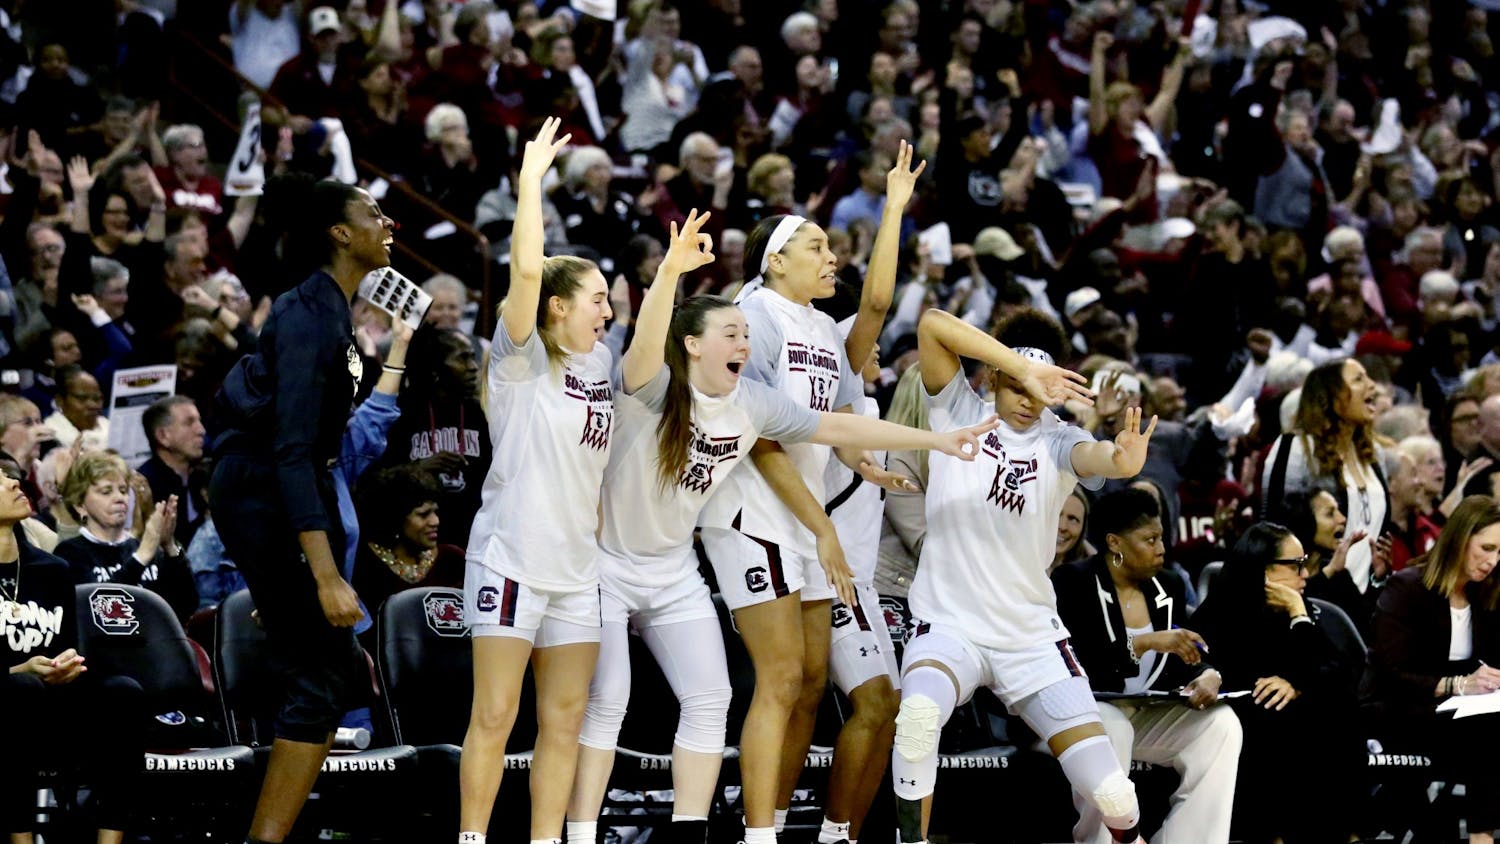 The Gamecock women's basketball team celebrates after one of its players scored a 3-point shot during the second half of the game against UConn on Feb. 11, 2020. 
